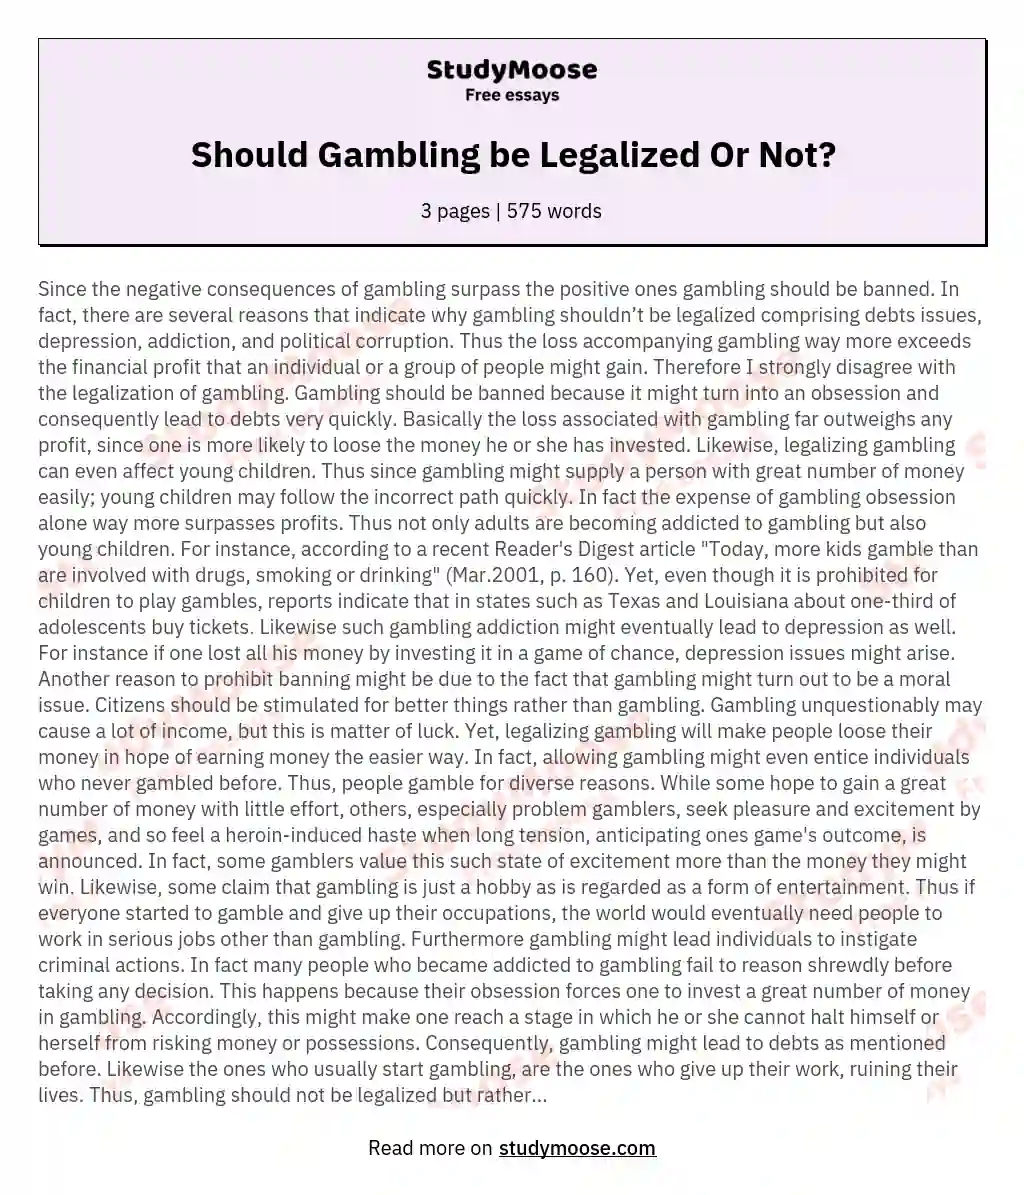 Should Gambling be Legalized Or Not? essay